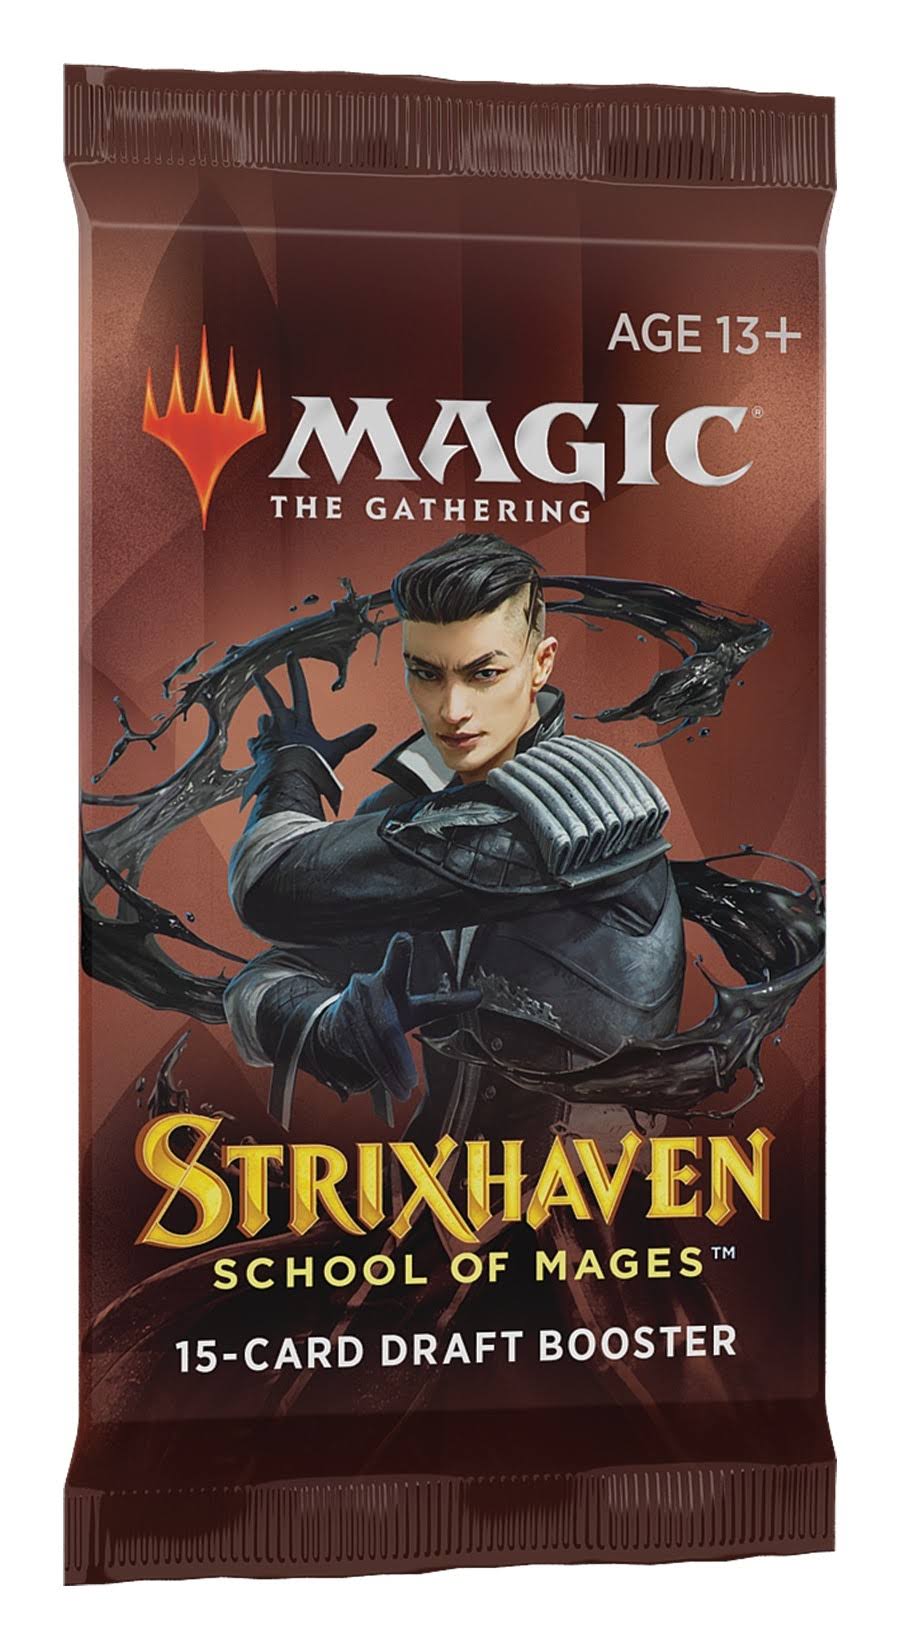 Magic The Gathering Strixhaven: School of Mages Draft Booster